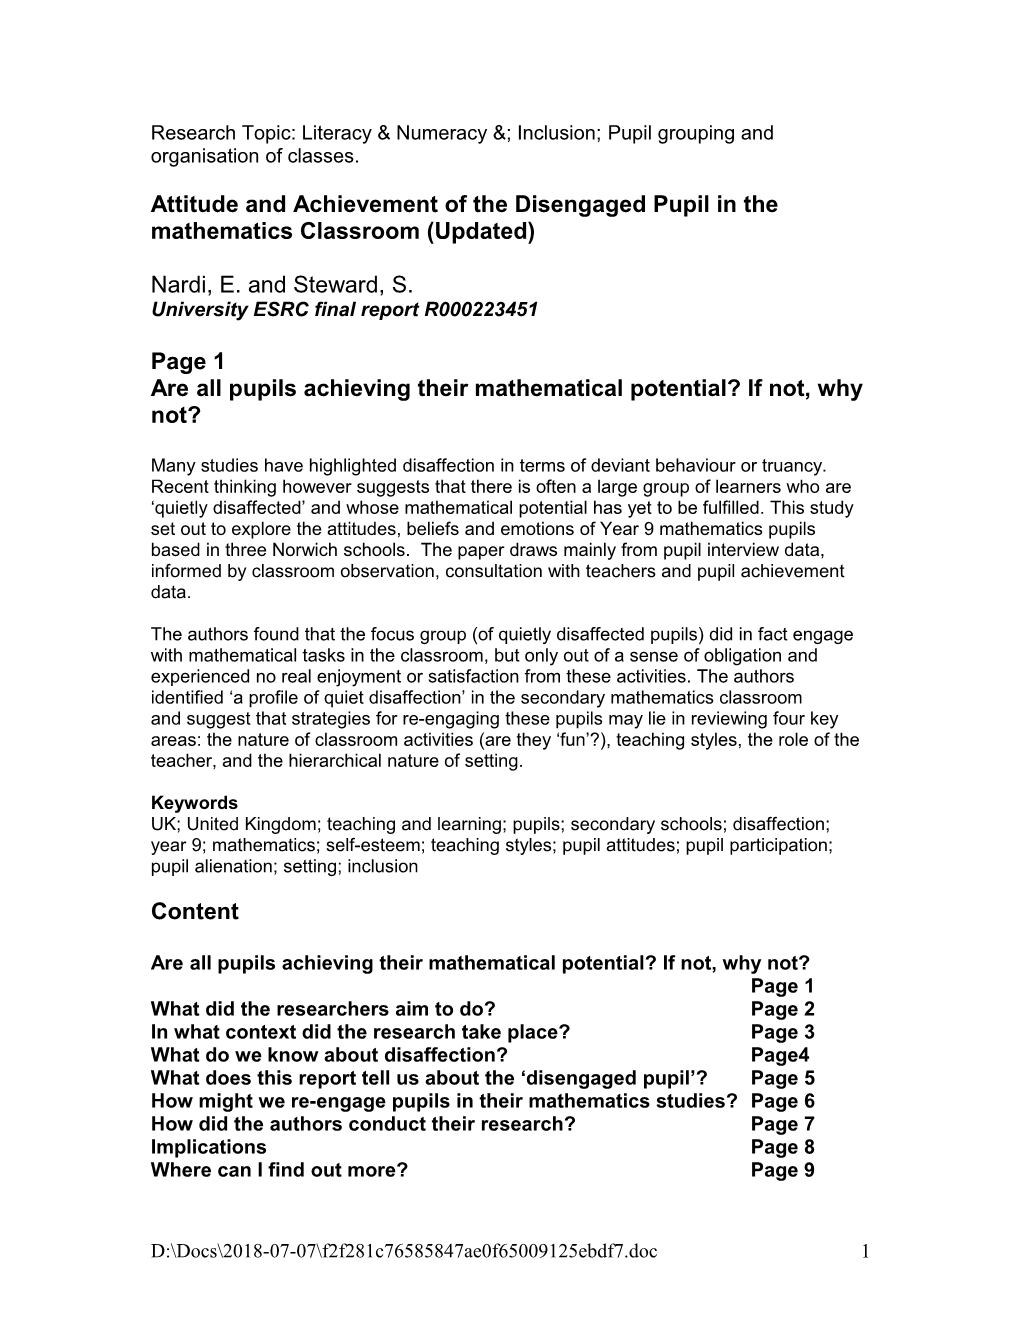 Attitude and Achievement of the Disengaged Pupil in the Mathematics Classroom